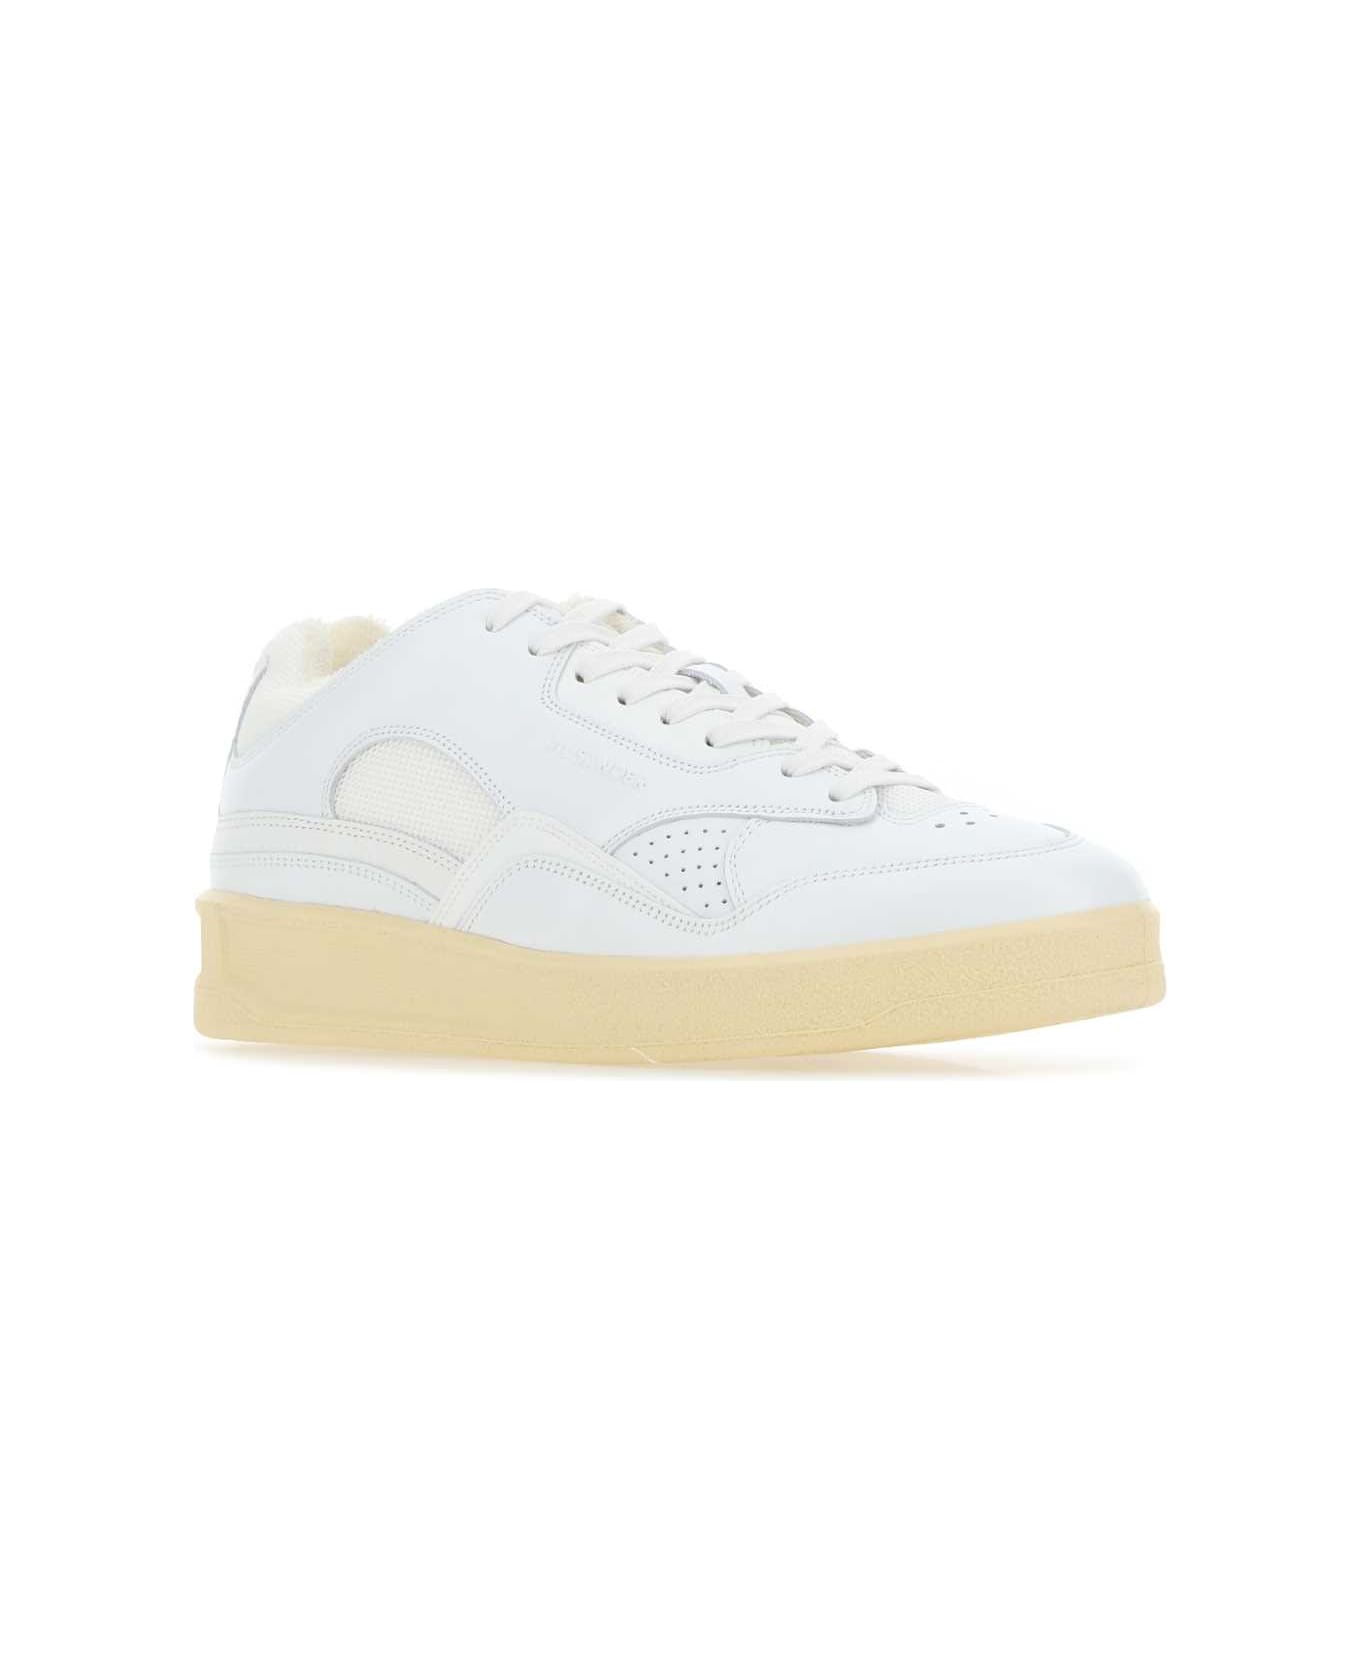 Jil Sander White Leather And Fabric Sneakers - 100